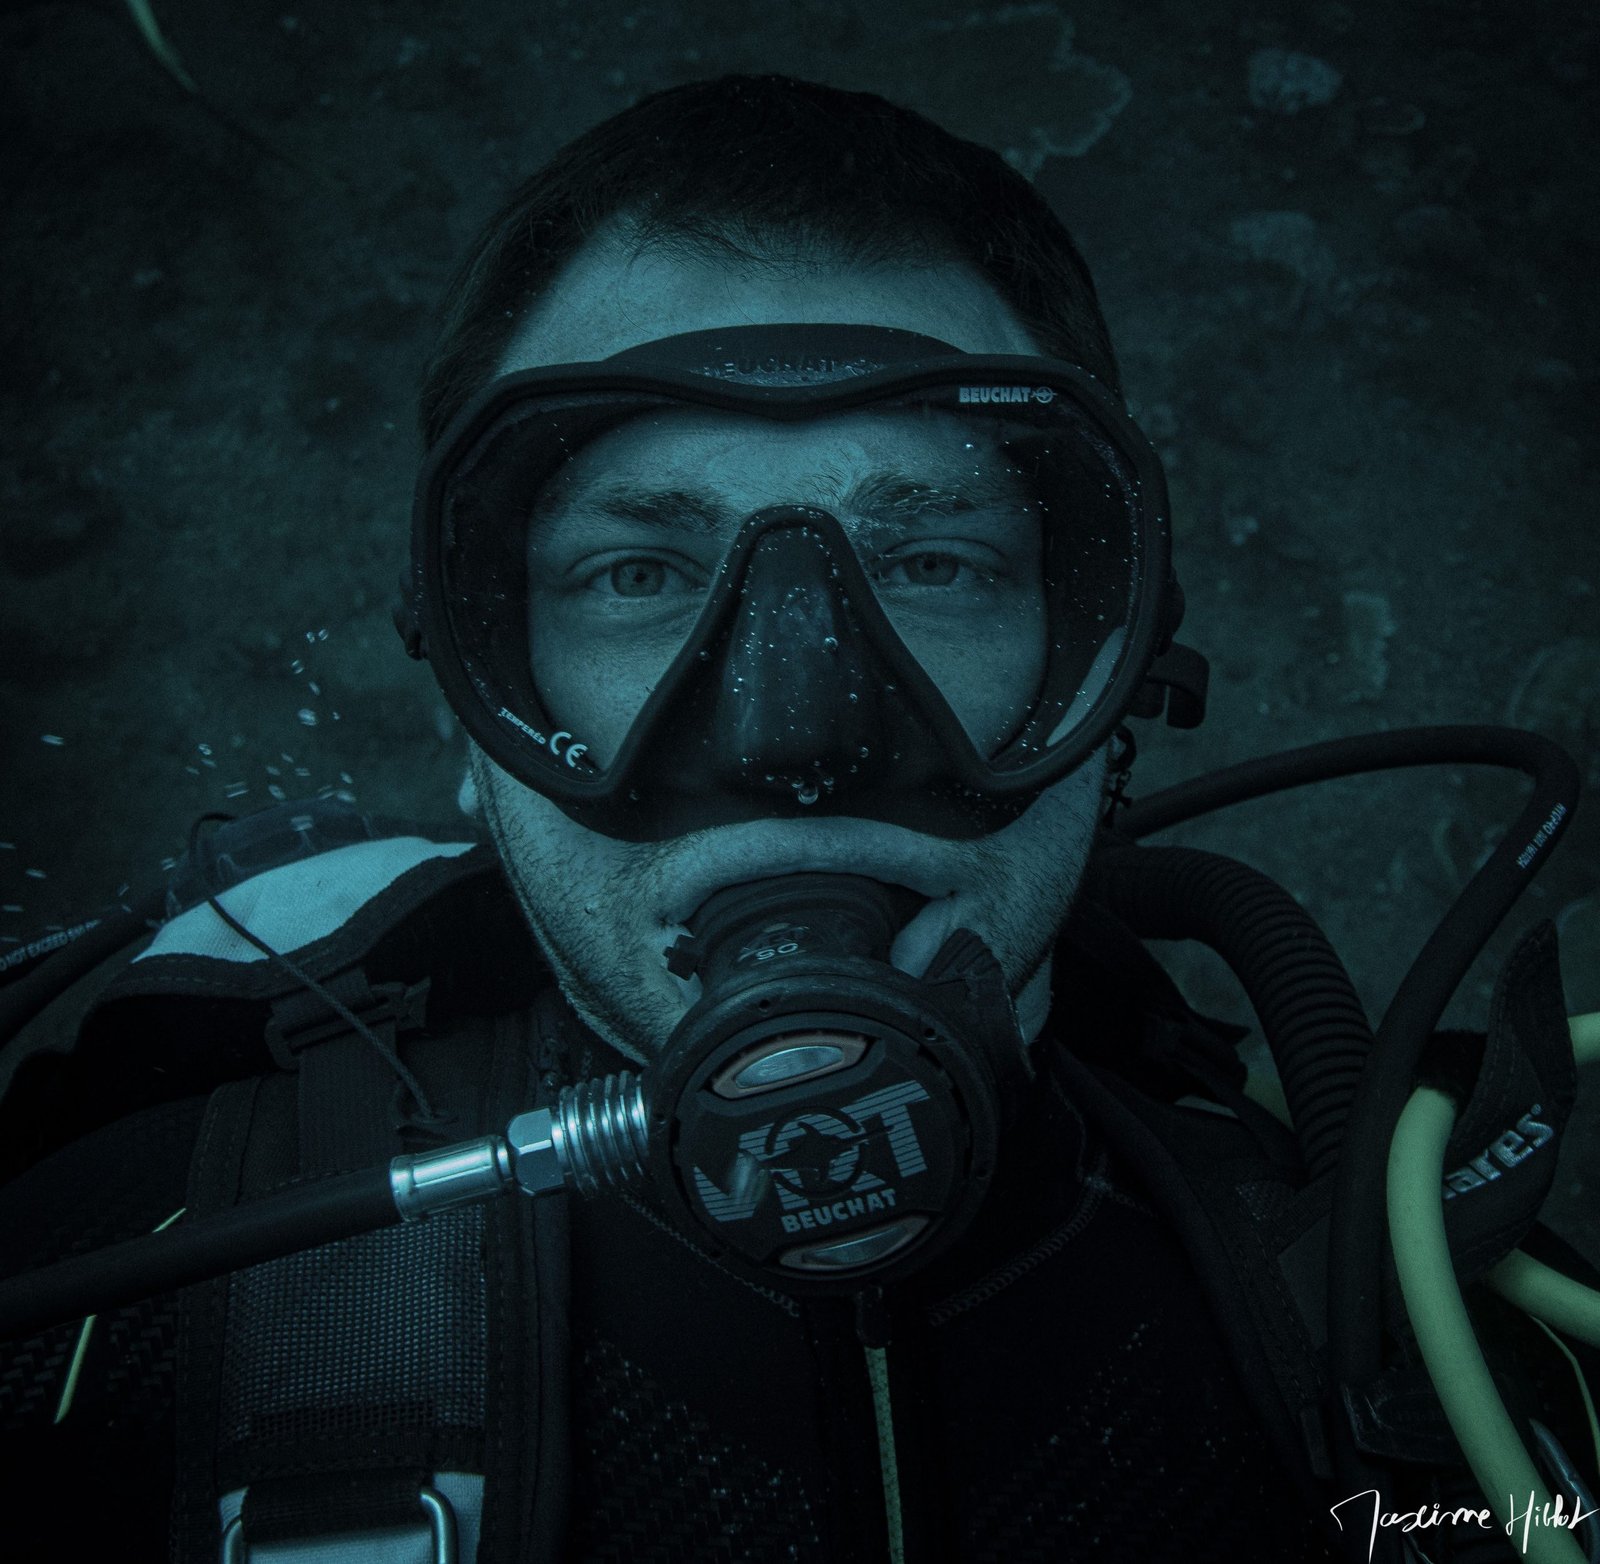 Plunge into the world of diving with this striking portrait taken by Maxime Hiblot at the USAT Liberty wreck dive site in Amed, Bali. The diver and the photographer had to perfectly manage their buoyancy to capture this shot. The gaze of the diver, visible through the diving mask, emits a serene and peaceful ambiance. For more underwater adventures, follow his Instagram accounts @orquefrance and @max.hiblot. #MaximeHiblot #ScubaDiving #Bali #Amed #USATLiberty #WreckDive #Buoyancy #Portrait #UnderwaterPhotography